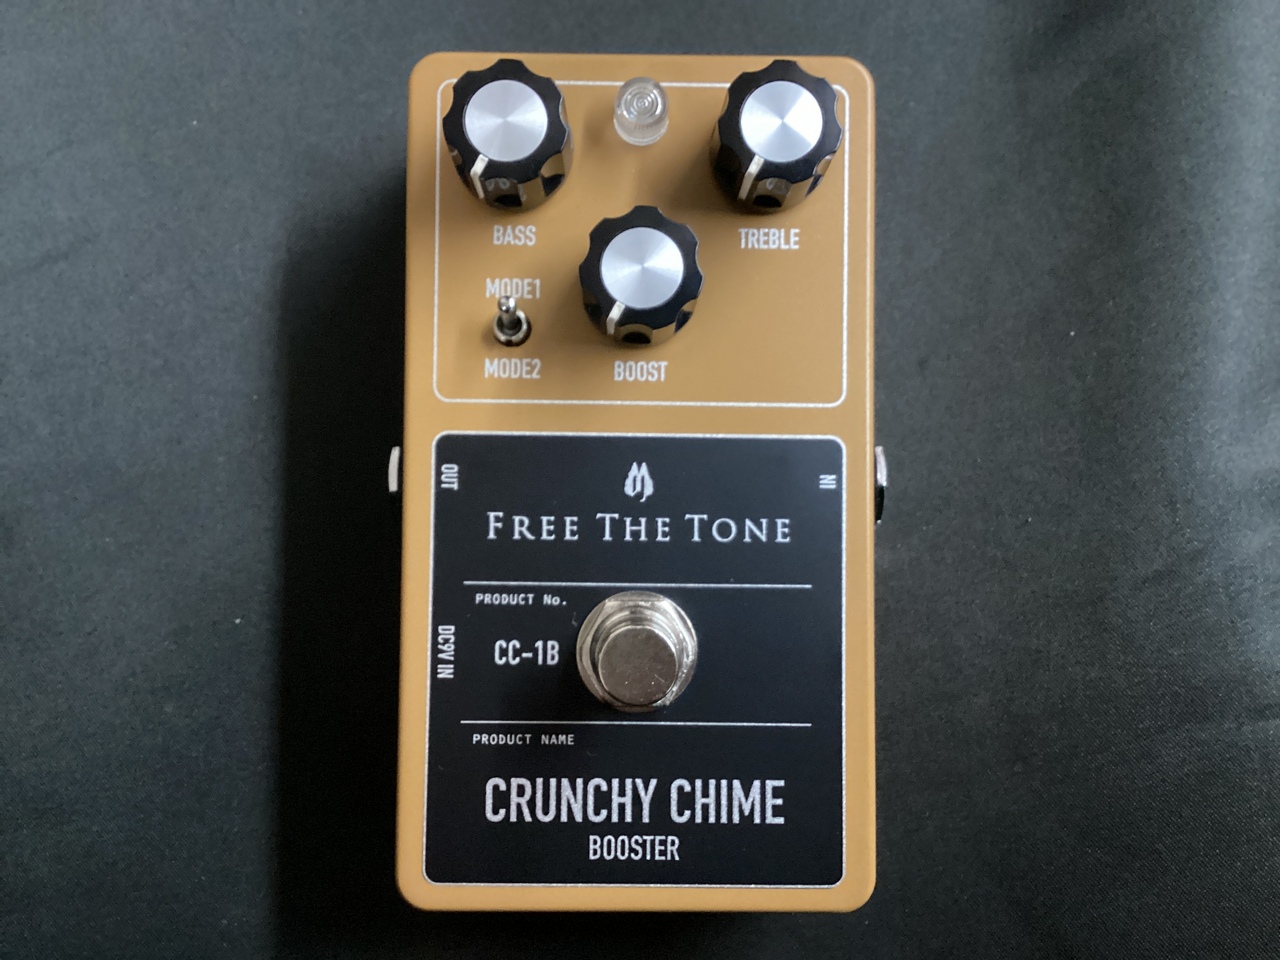 Free The Tone CRUNCHY CHIME / CC-1B BOOSTER(フリーザトーン 